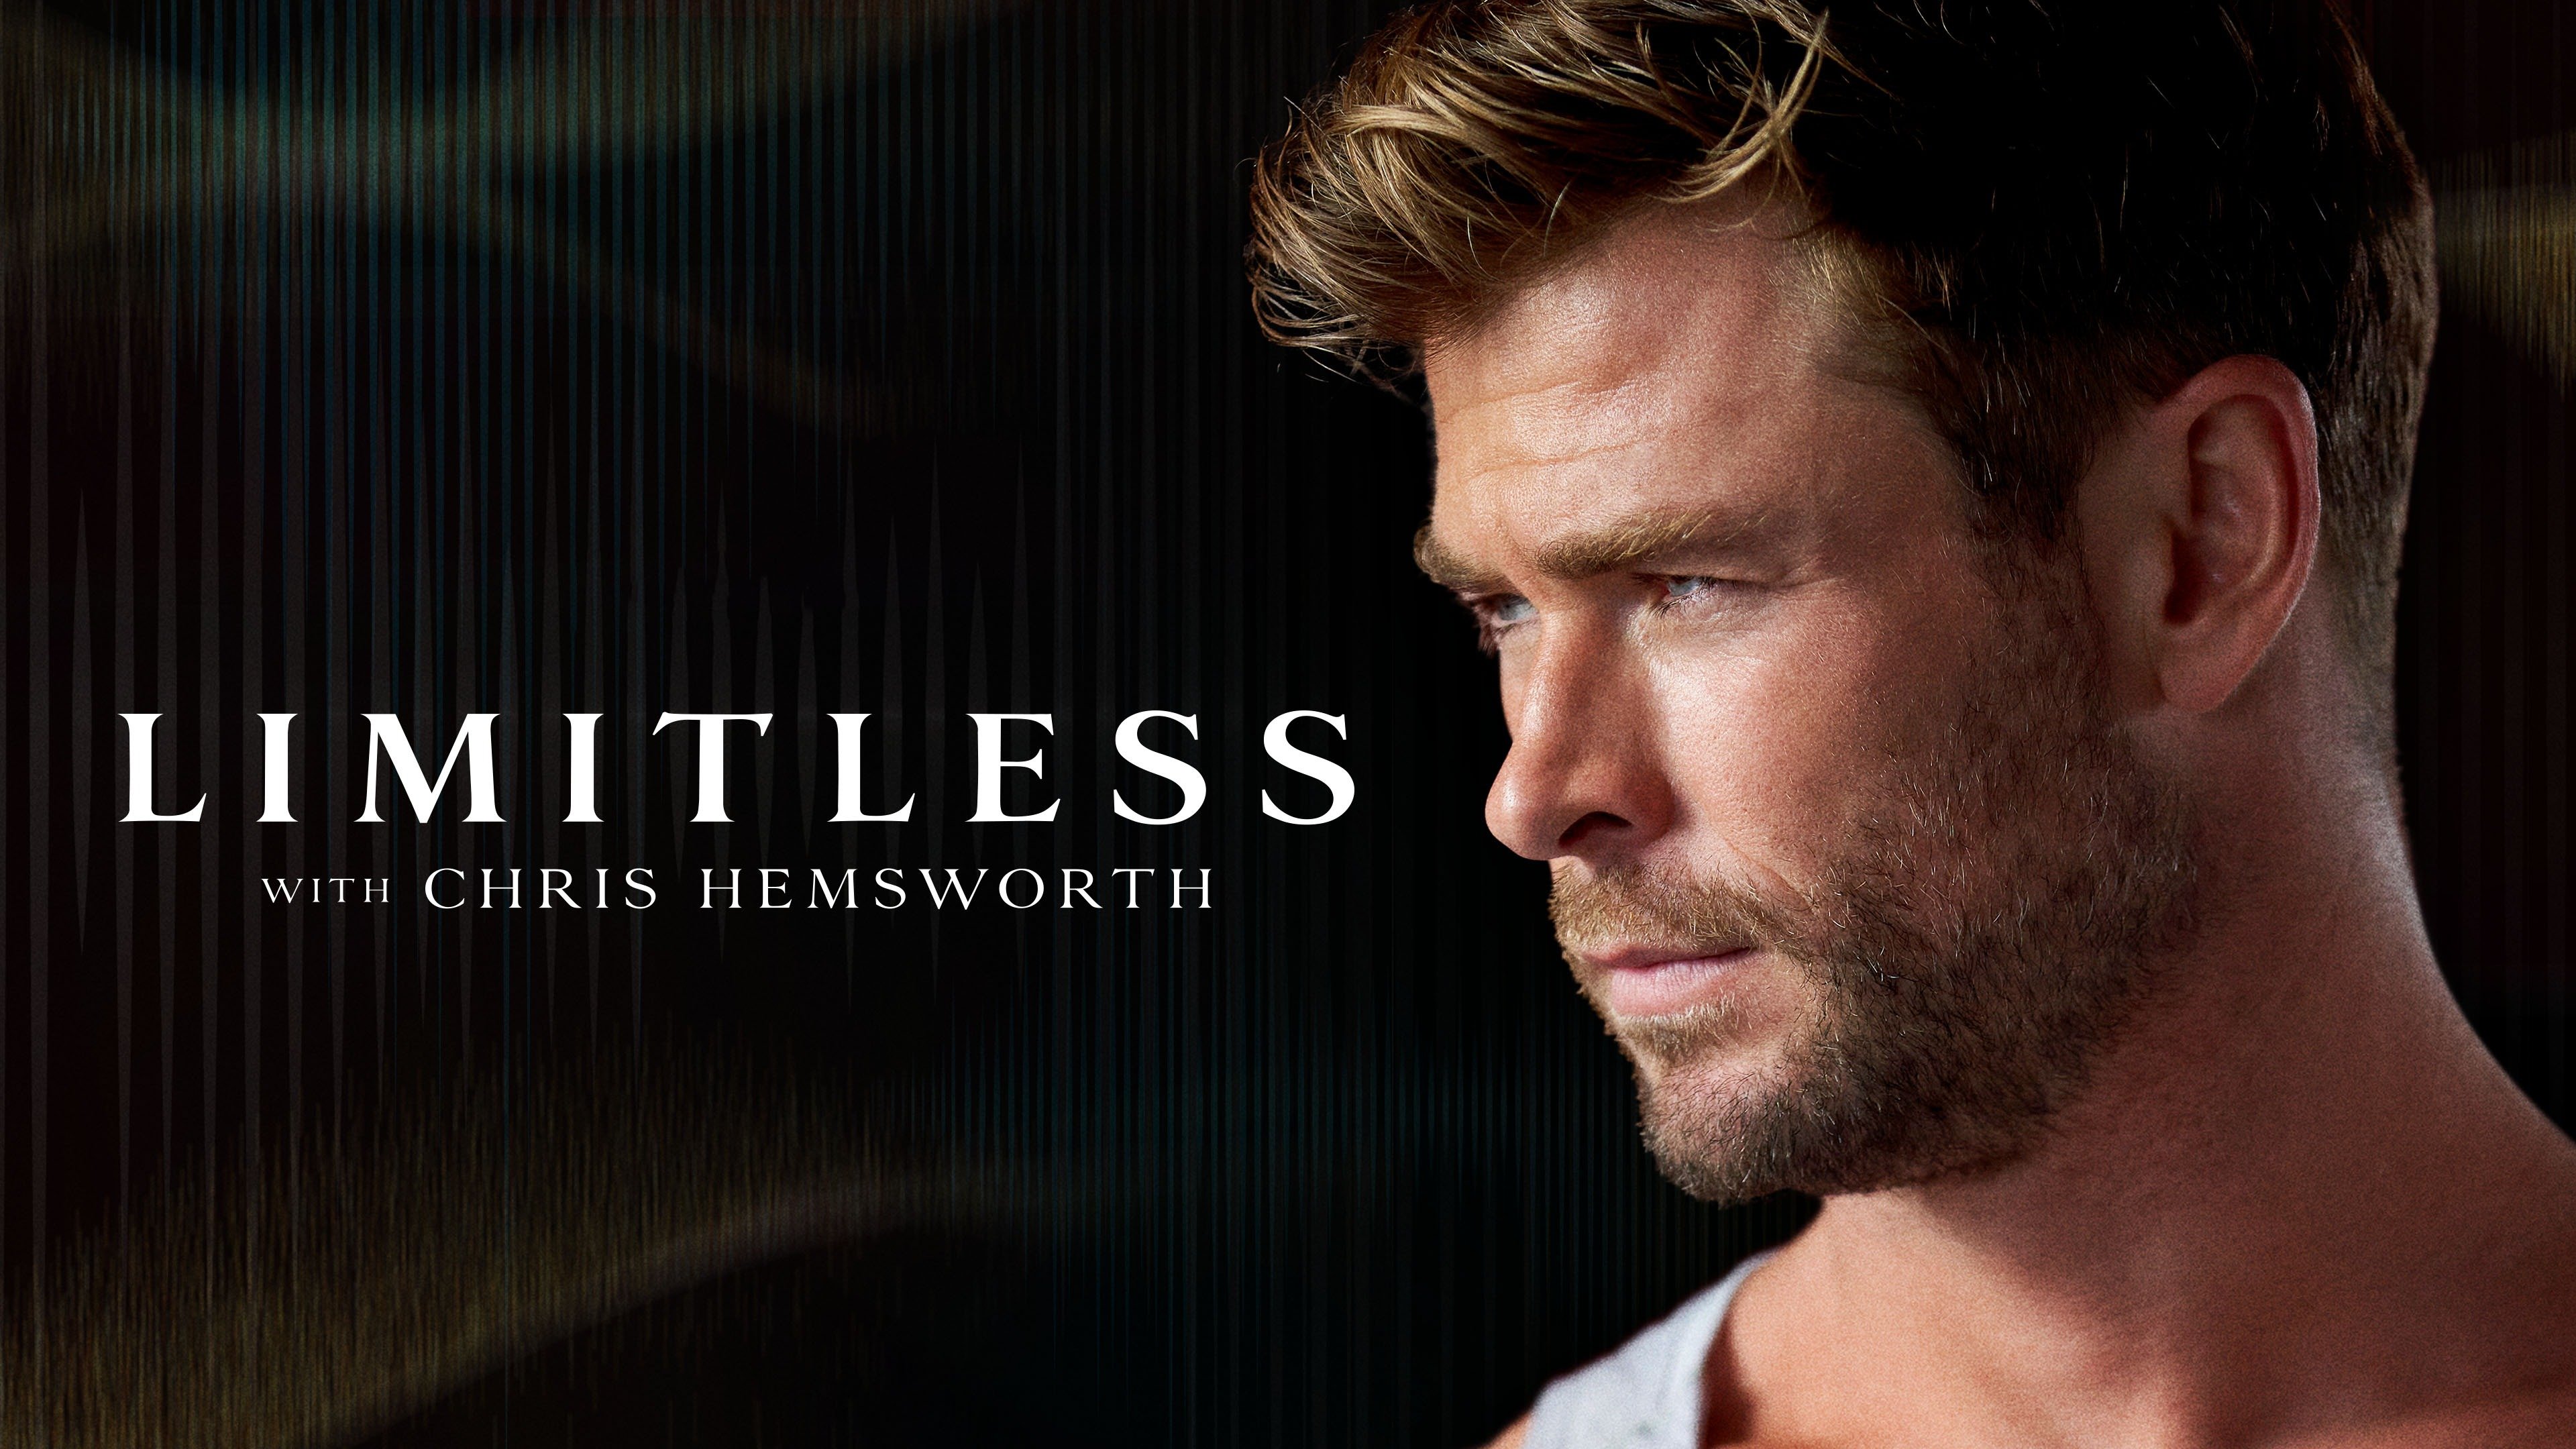 Watch Limitless Full movie Online In HD | Find where to watch it online on  Justdial Malaysia